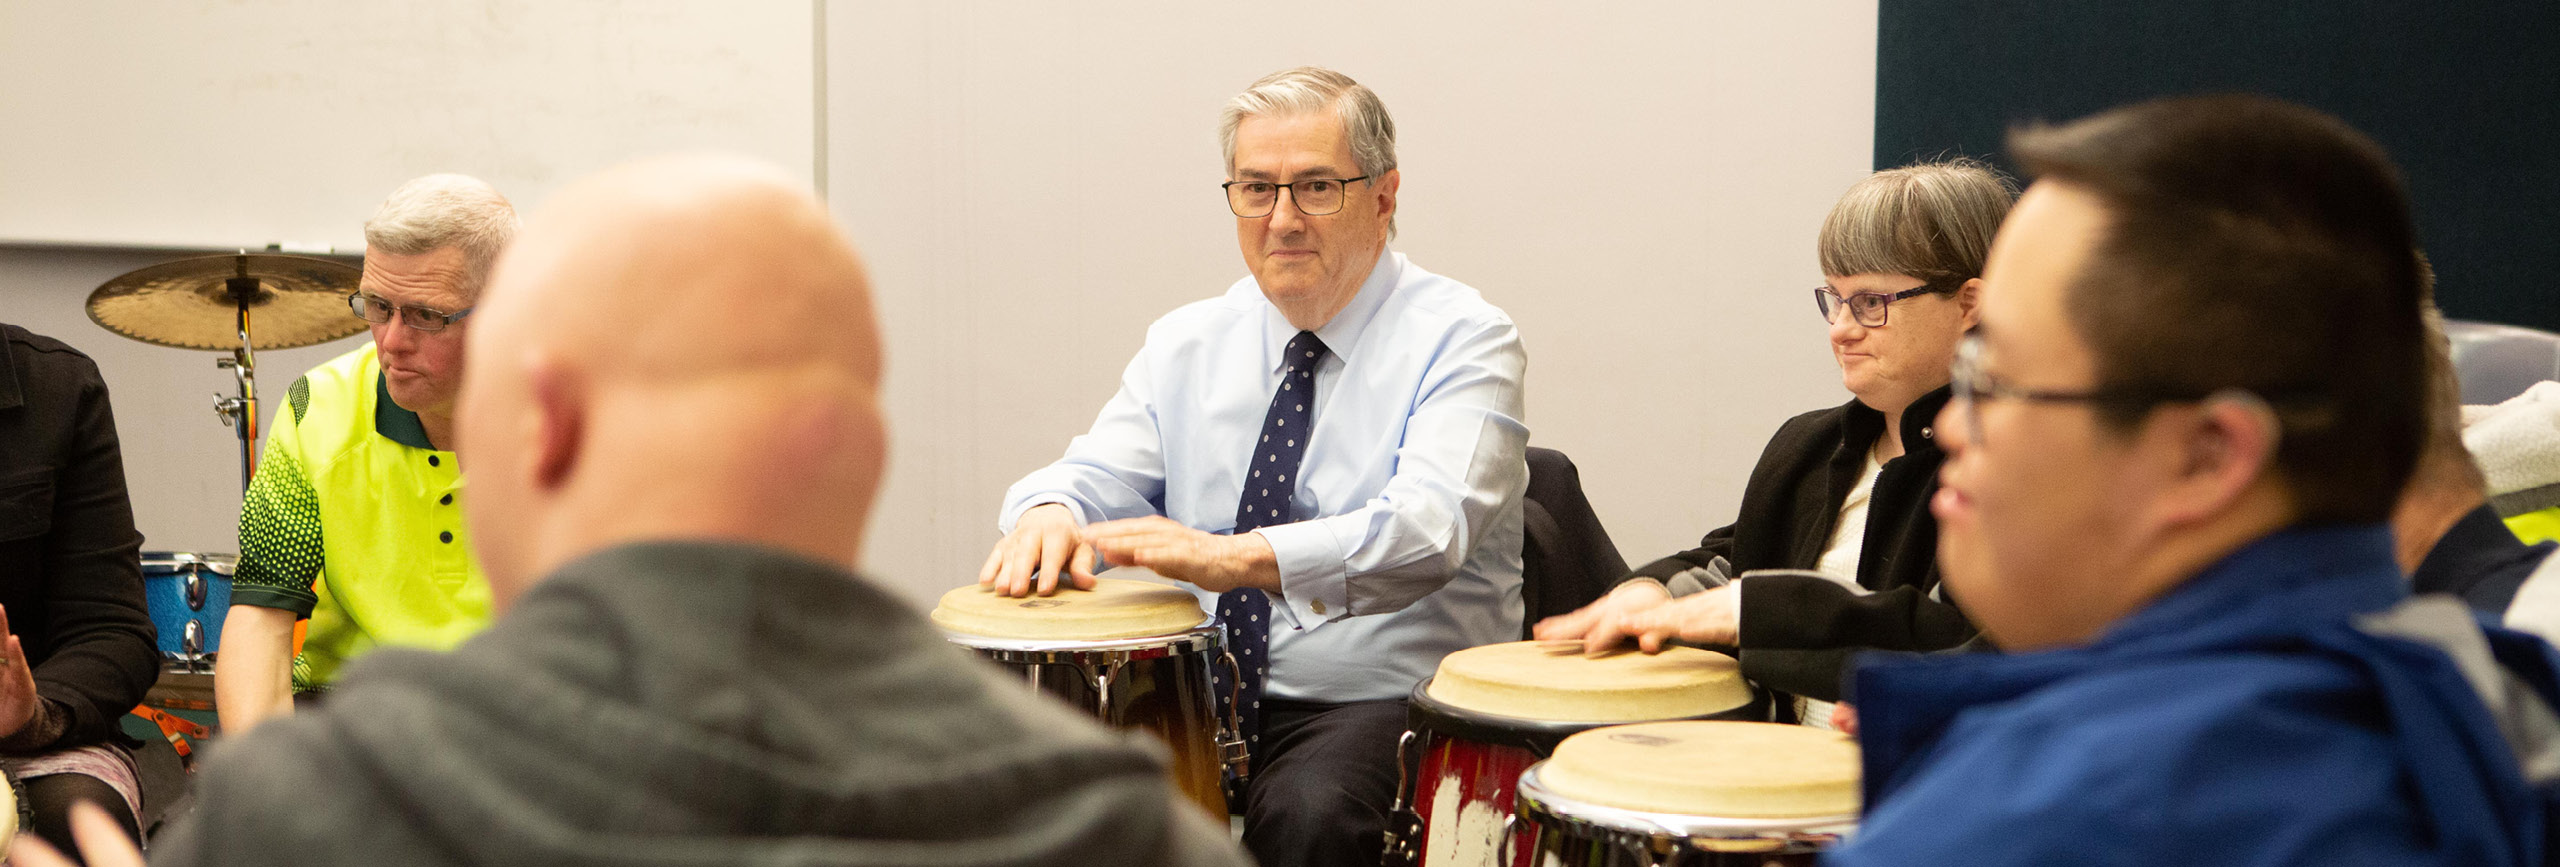 Mayor joins music therapy drumming class